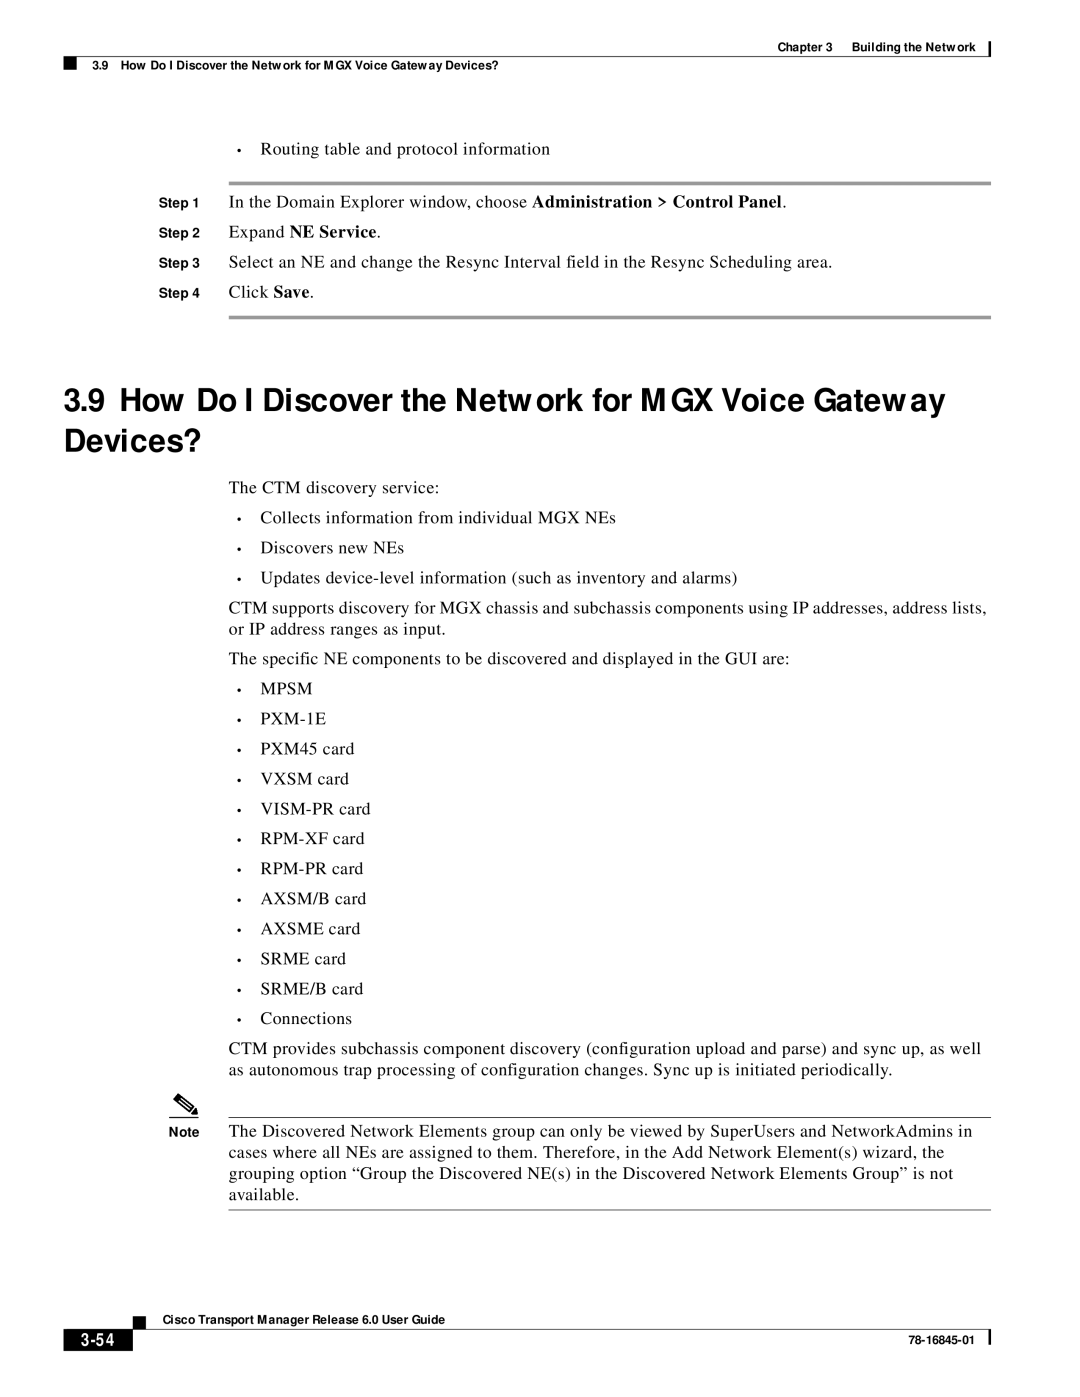 Cisco Systems 78-16845-01 manual How Do I Discover the Network for MGX Voice Gateway Devices?, Expand NE Service, 3-54 